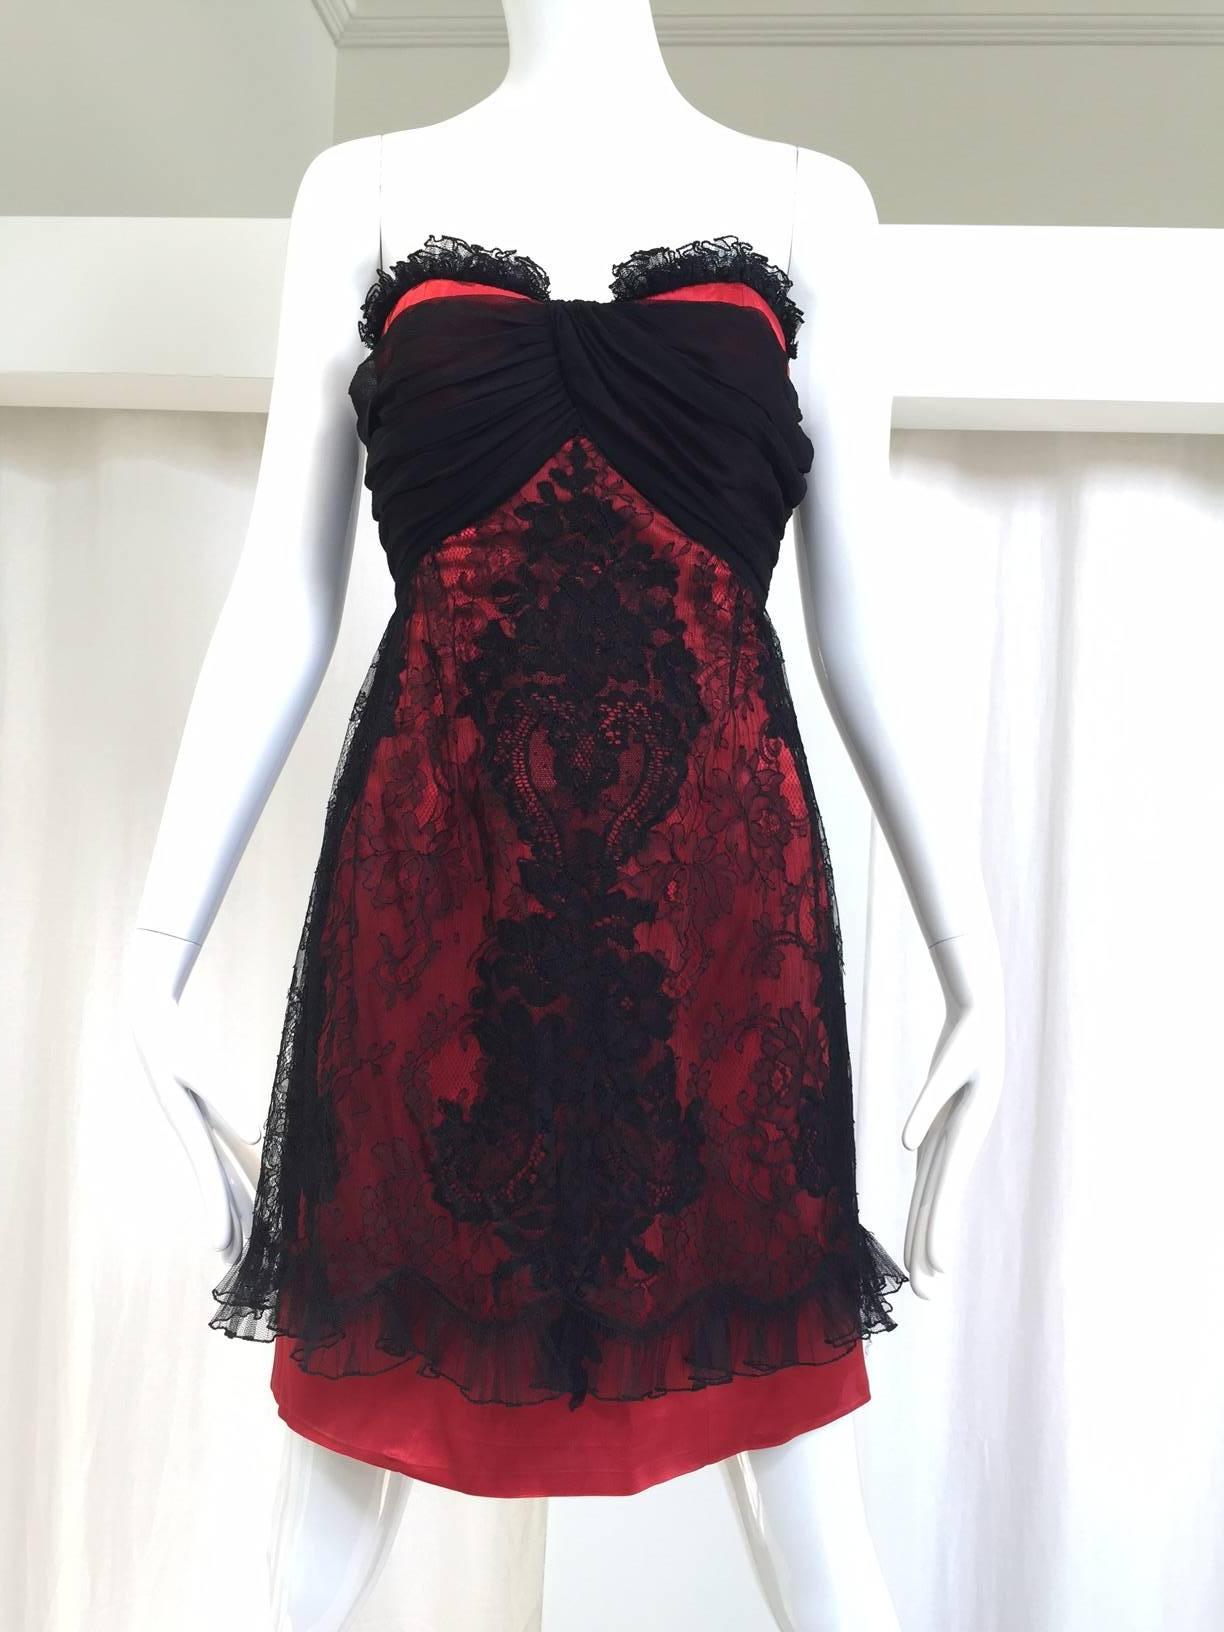 1990s Christian Lacroix red and black chantily lace strapless cocktail dress.
Size: XS
Bust: 32